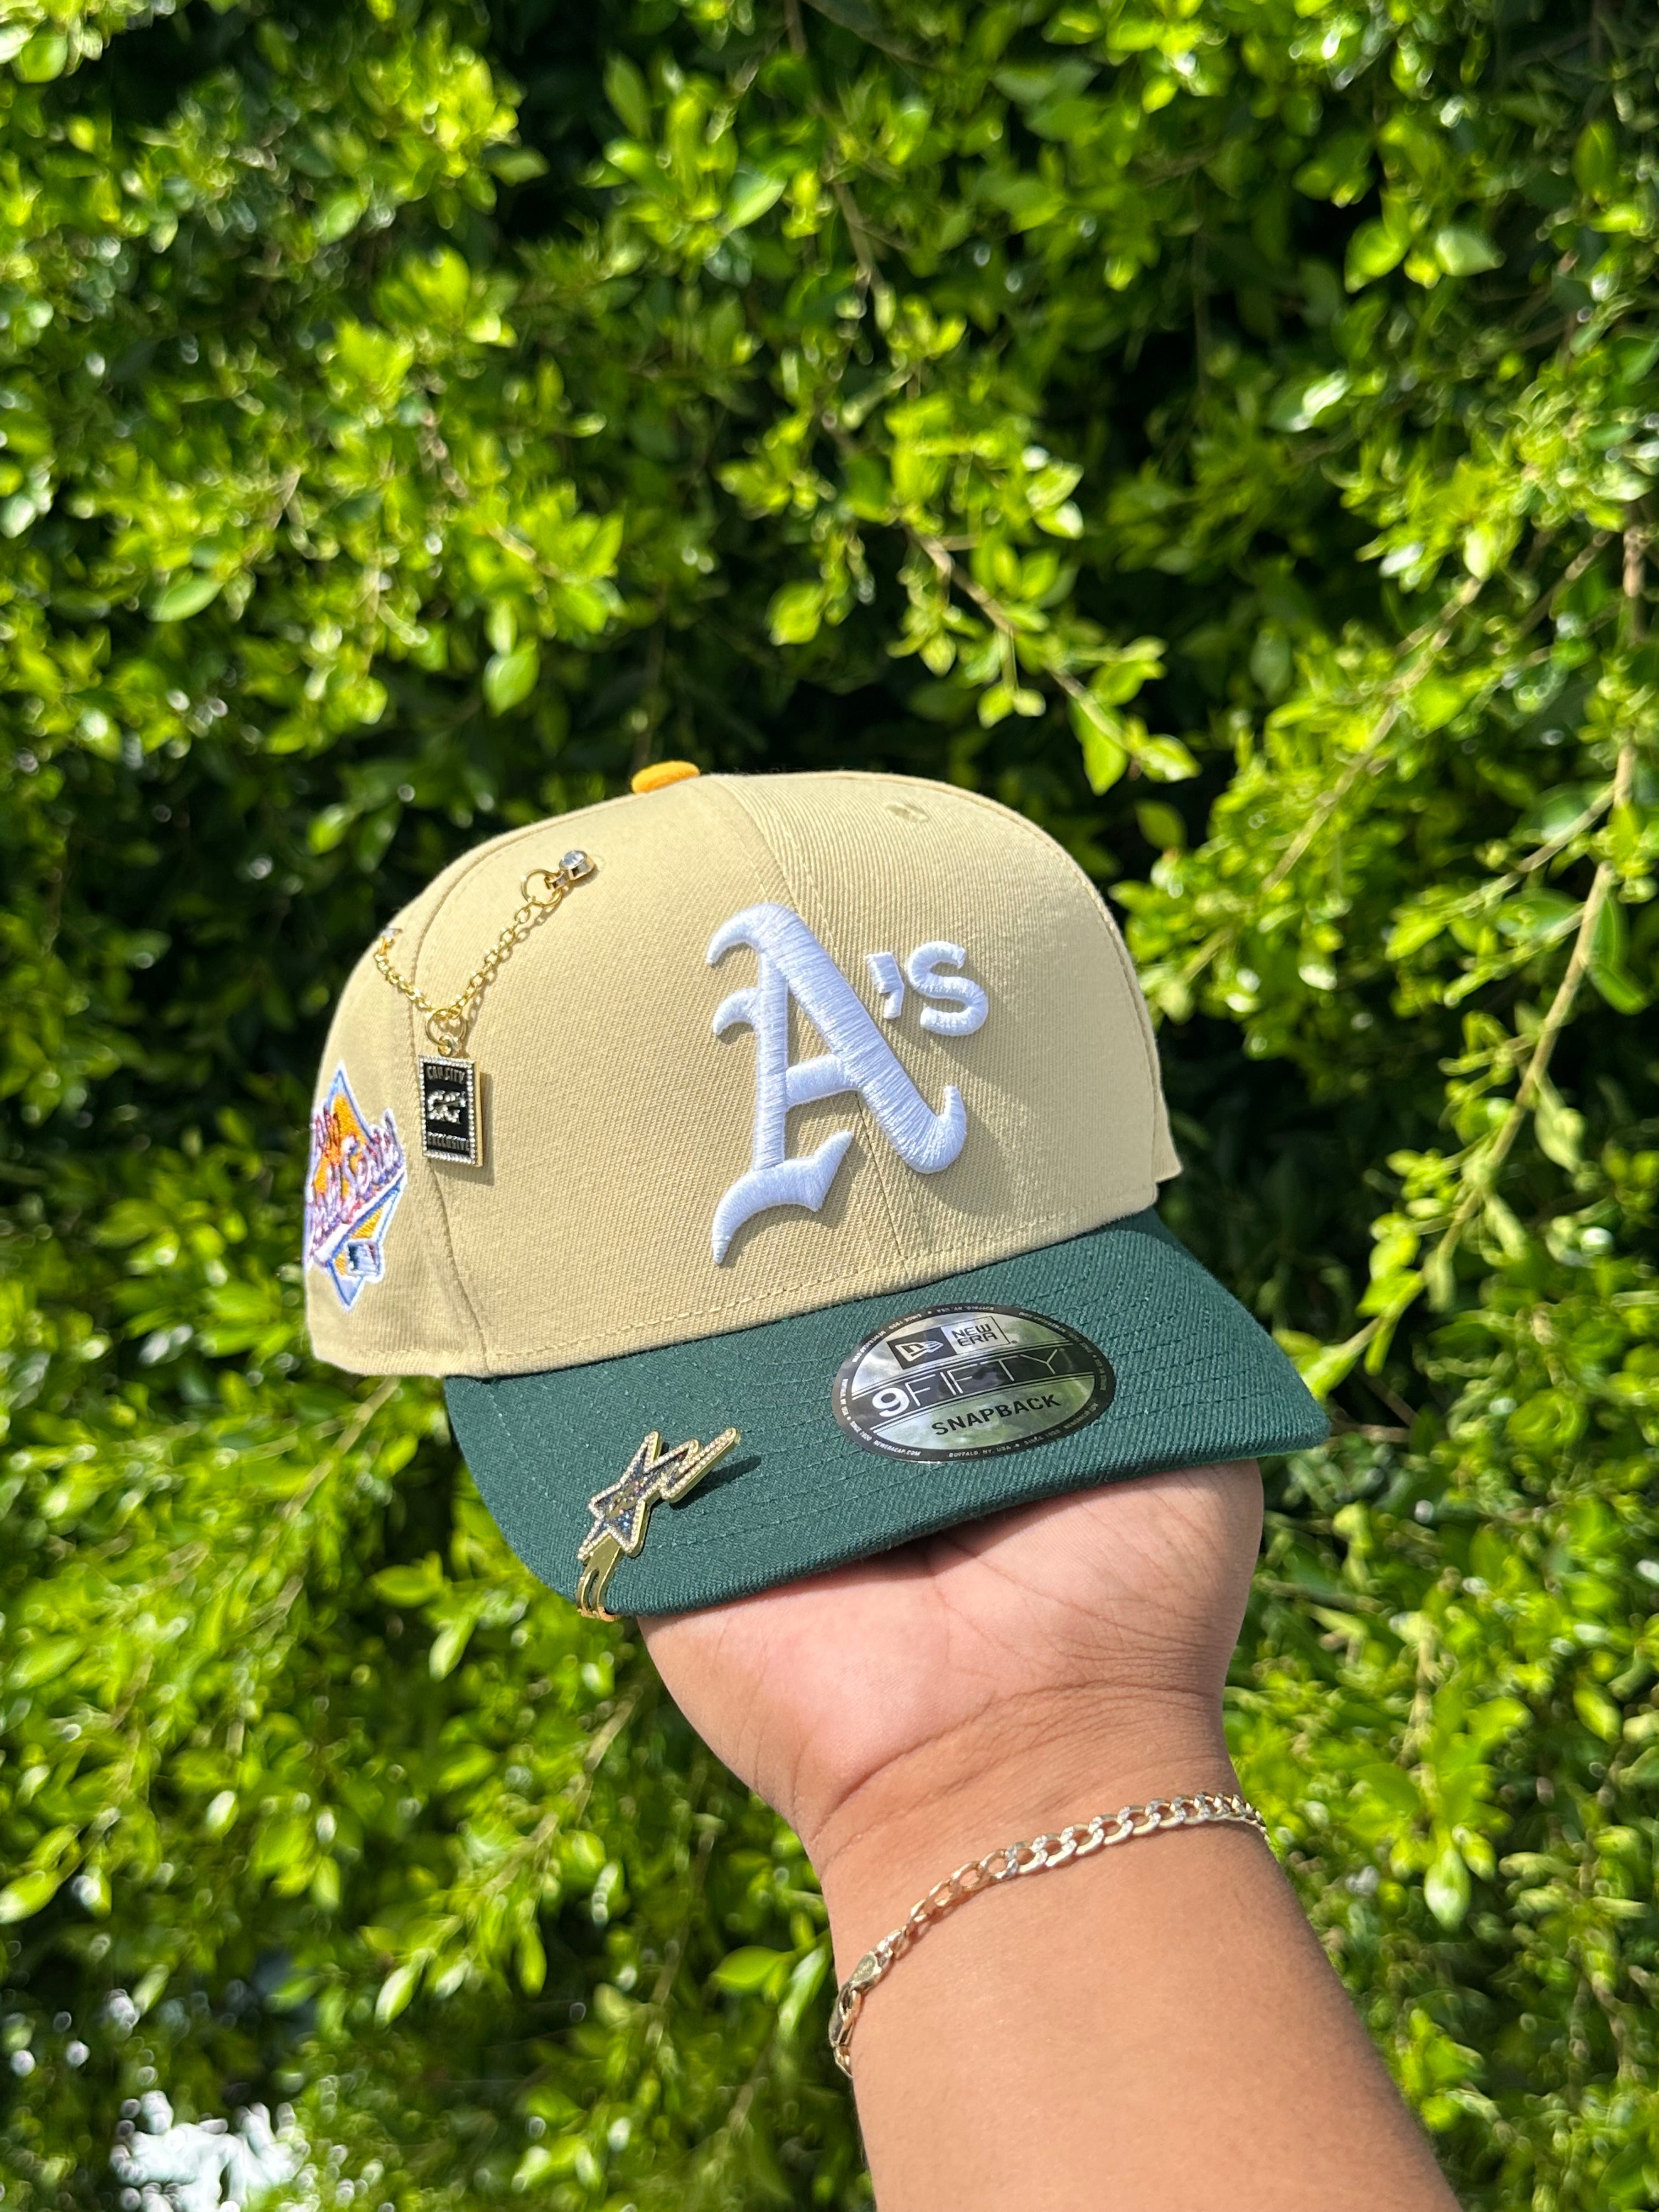 NEW ERA EXCLUSIVE 9FIFTY CREAM/FOREST GREEN OAKLAND A'S SNAPBACK W/ 1989 WORLD SERIES PATCH